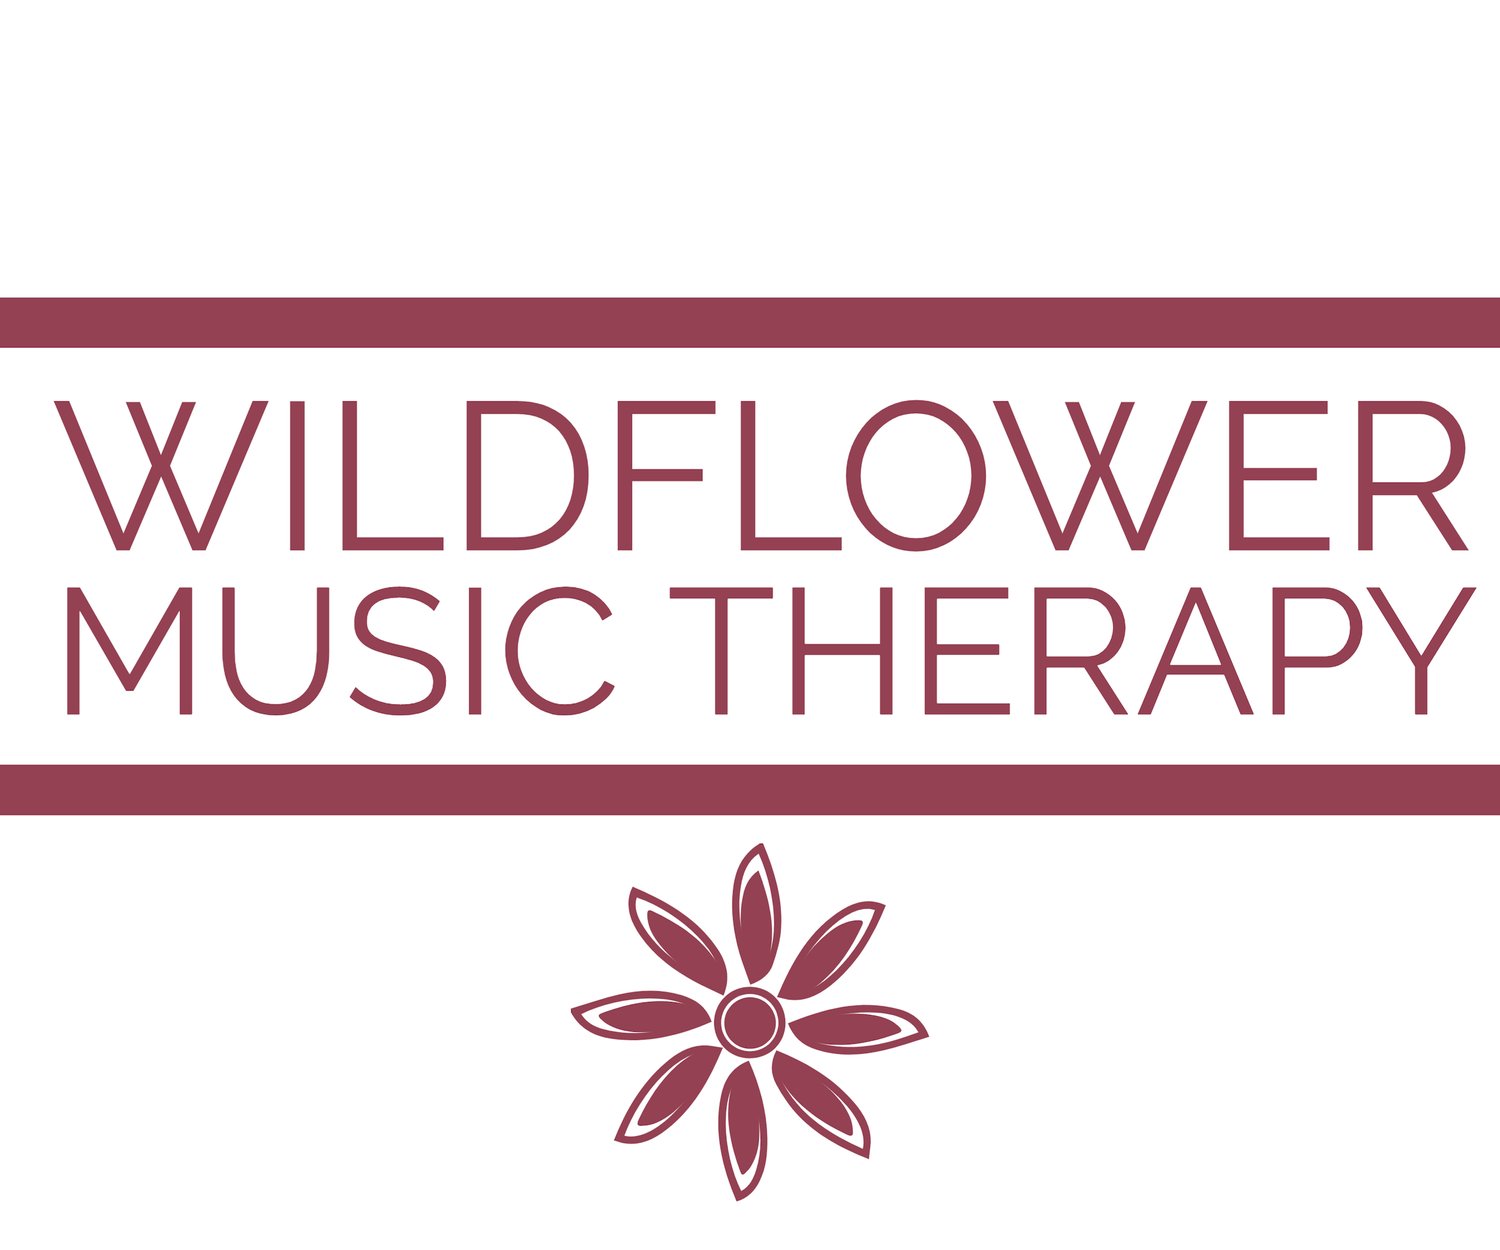 Wildflower Music Therapy